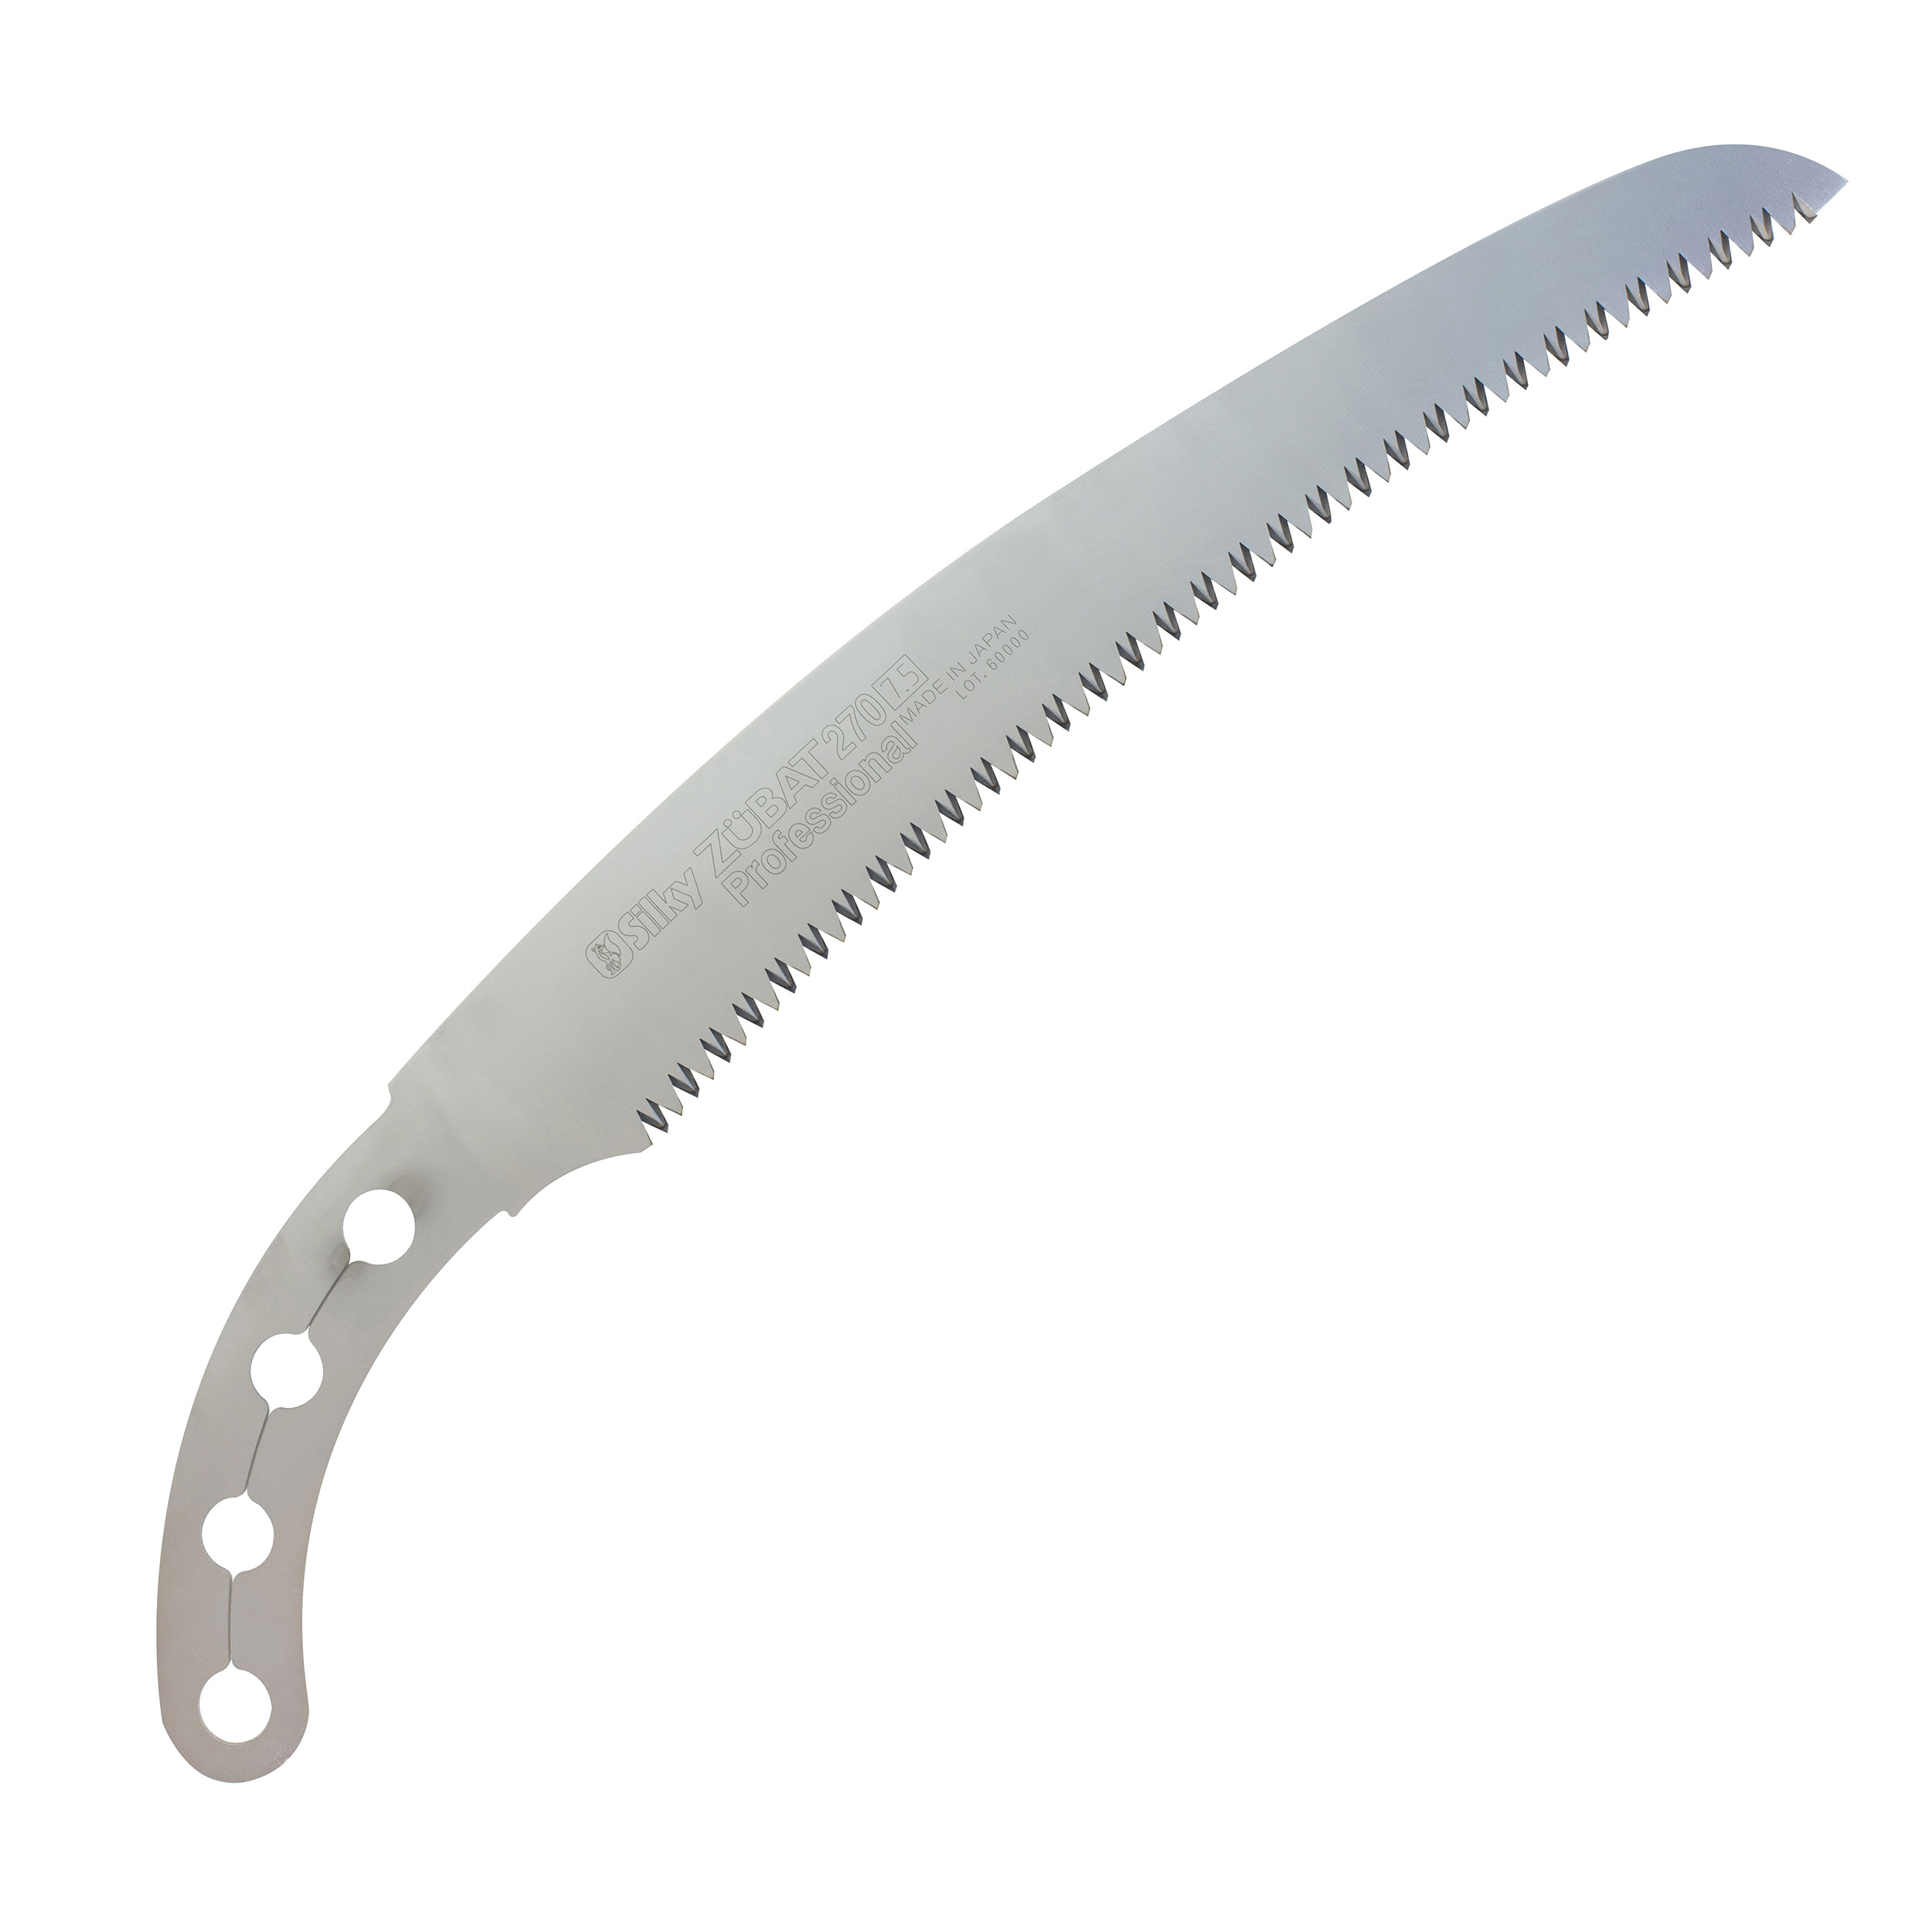 Zubat Replacement Blade, 270mm, Large Teeth